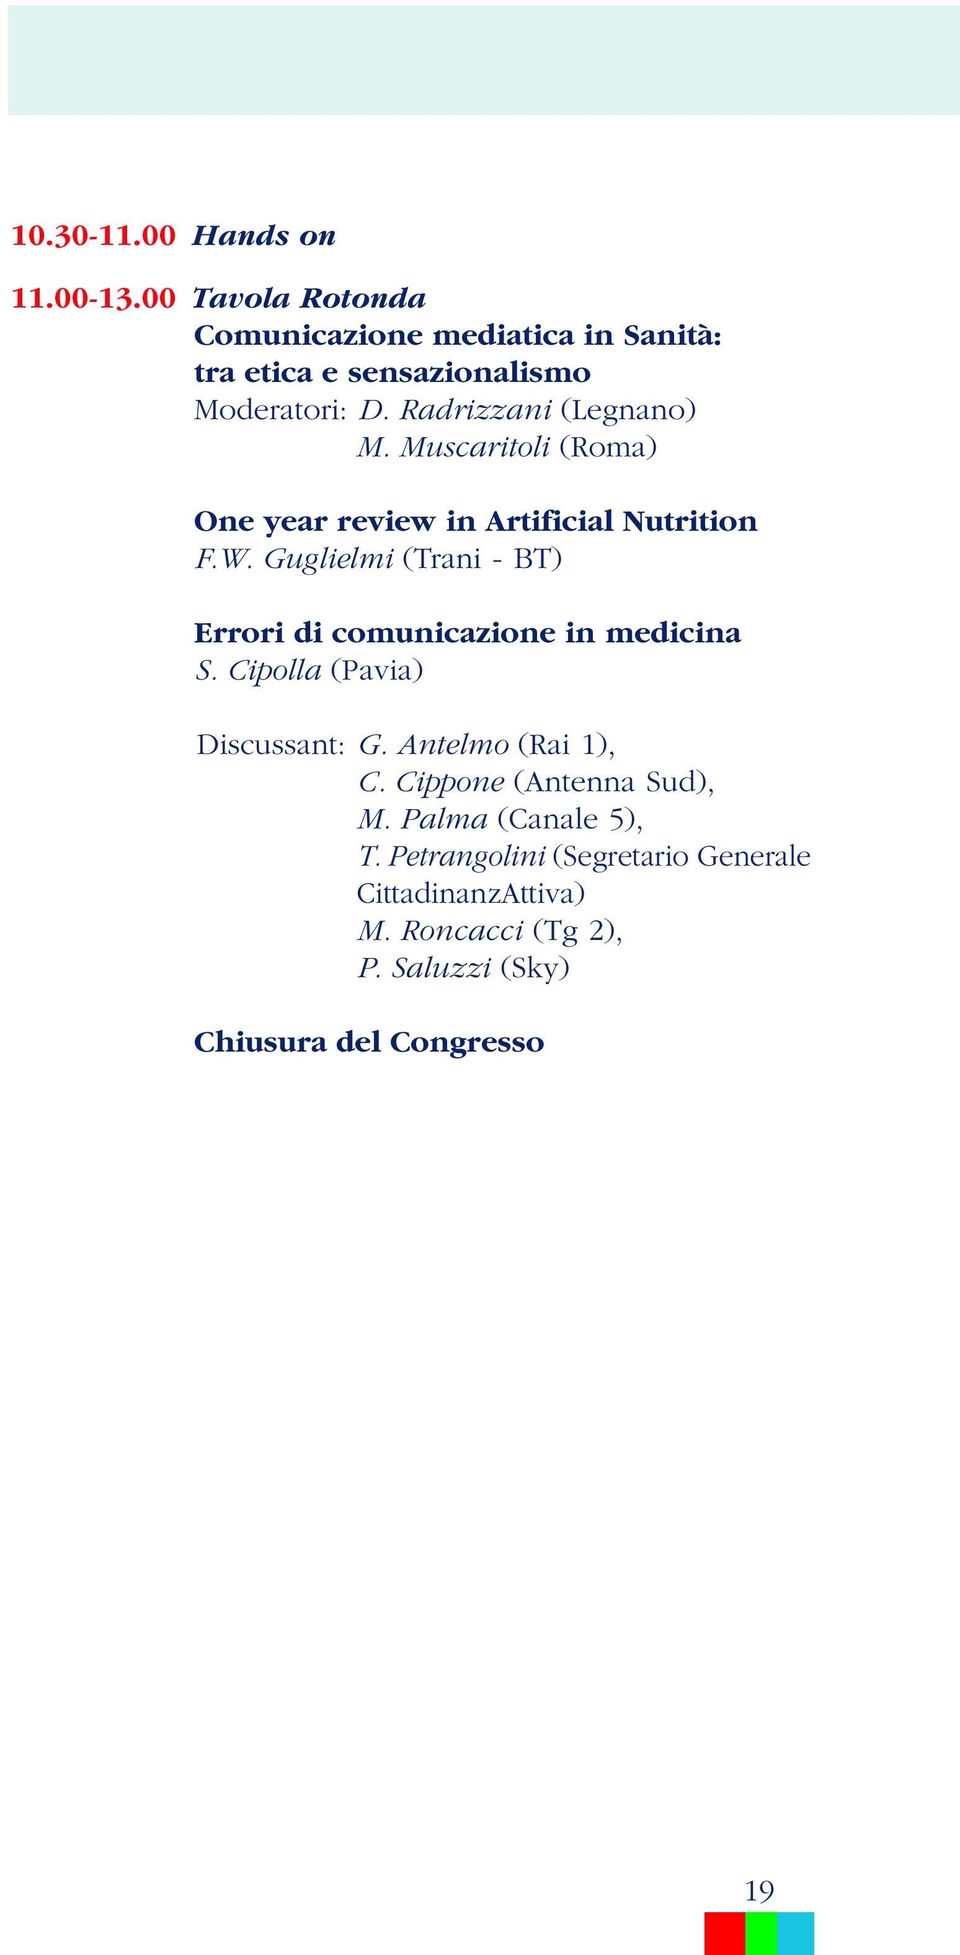 Muscaritoli (Roma) One year review in Artificial Nutrition F.W.